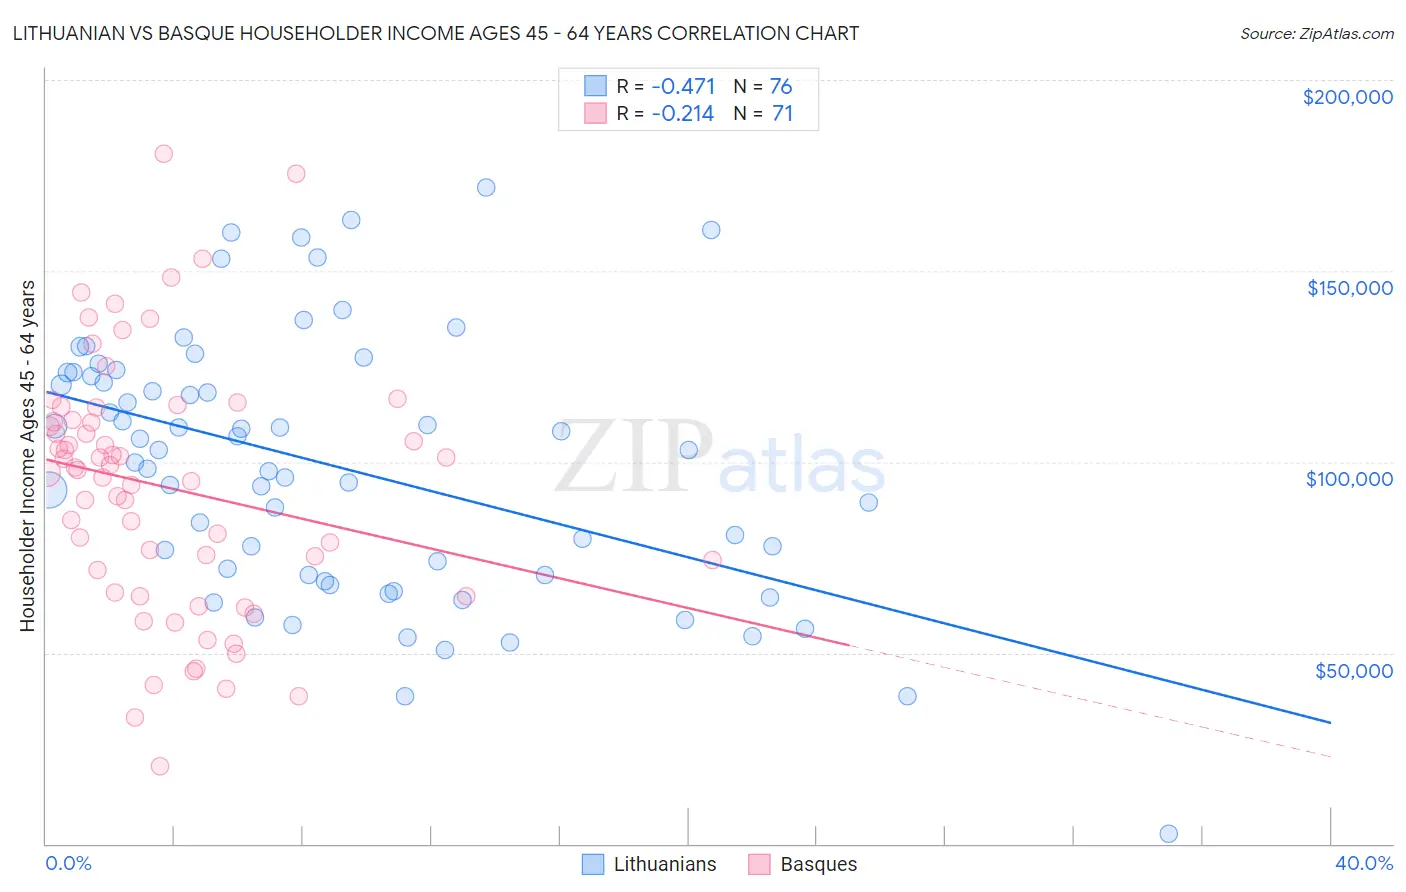 Lithuanian vs Basque Householder Income Ages 45 - 64 years